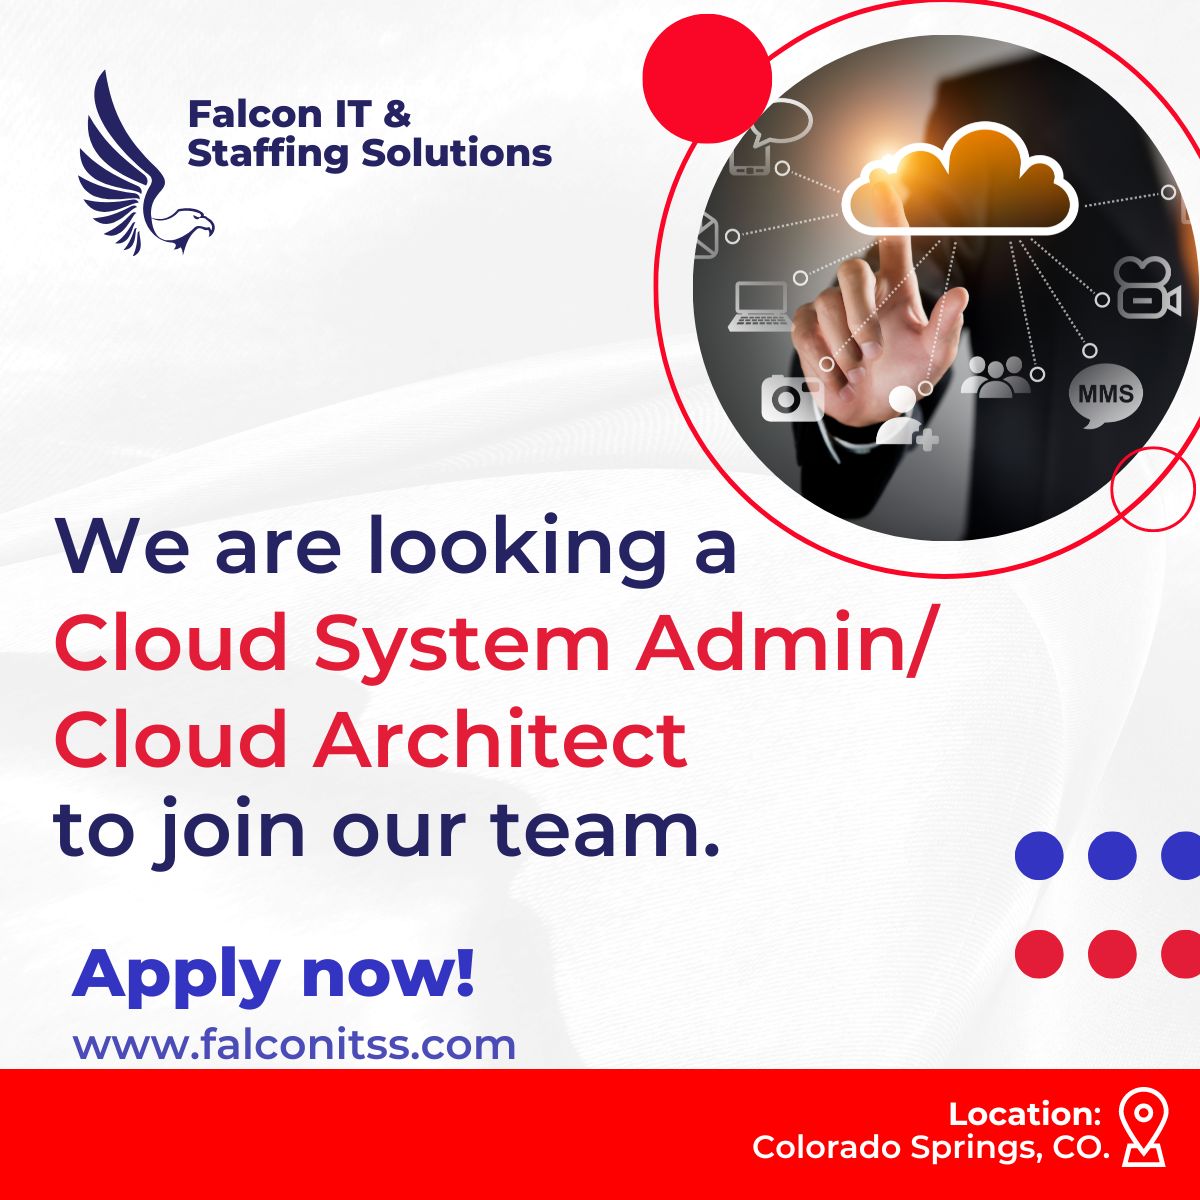 We are #HIRING a Cloud System Admin/Cloud Architect to design and implementation of a secure cloud environment.

📌APPLY here👉bit.ly/3MToZCs
📧 Or email mcohen@falconitss.com 
📍Colorado Springs, CO.

@falconitss
#cloudcomputing #cloudarchitect #techjobs